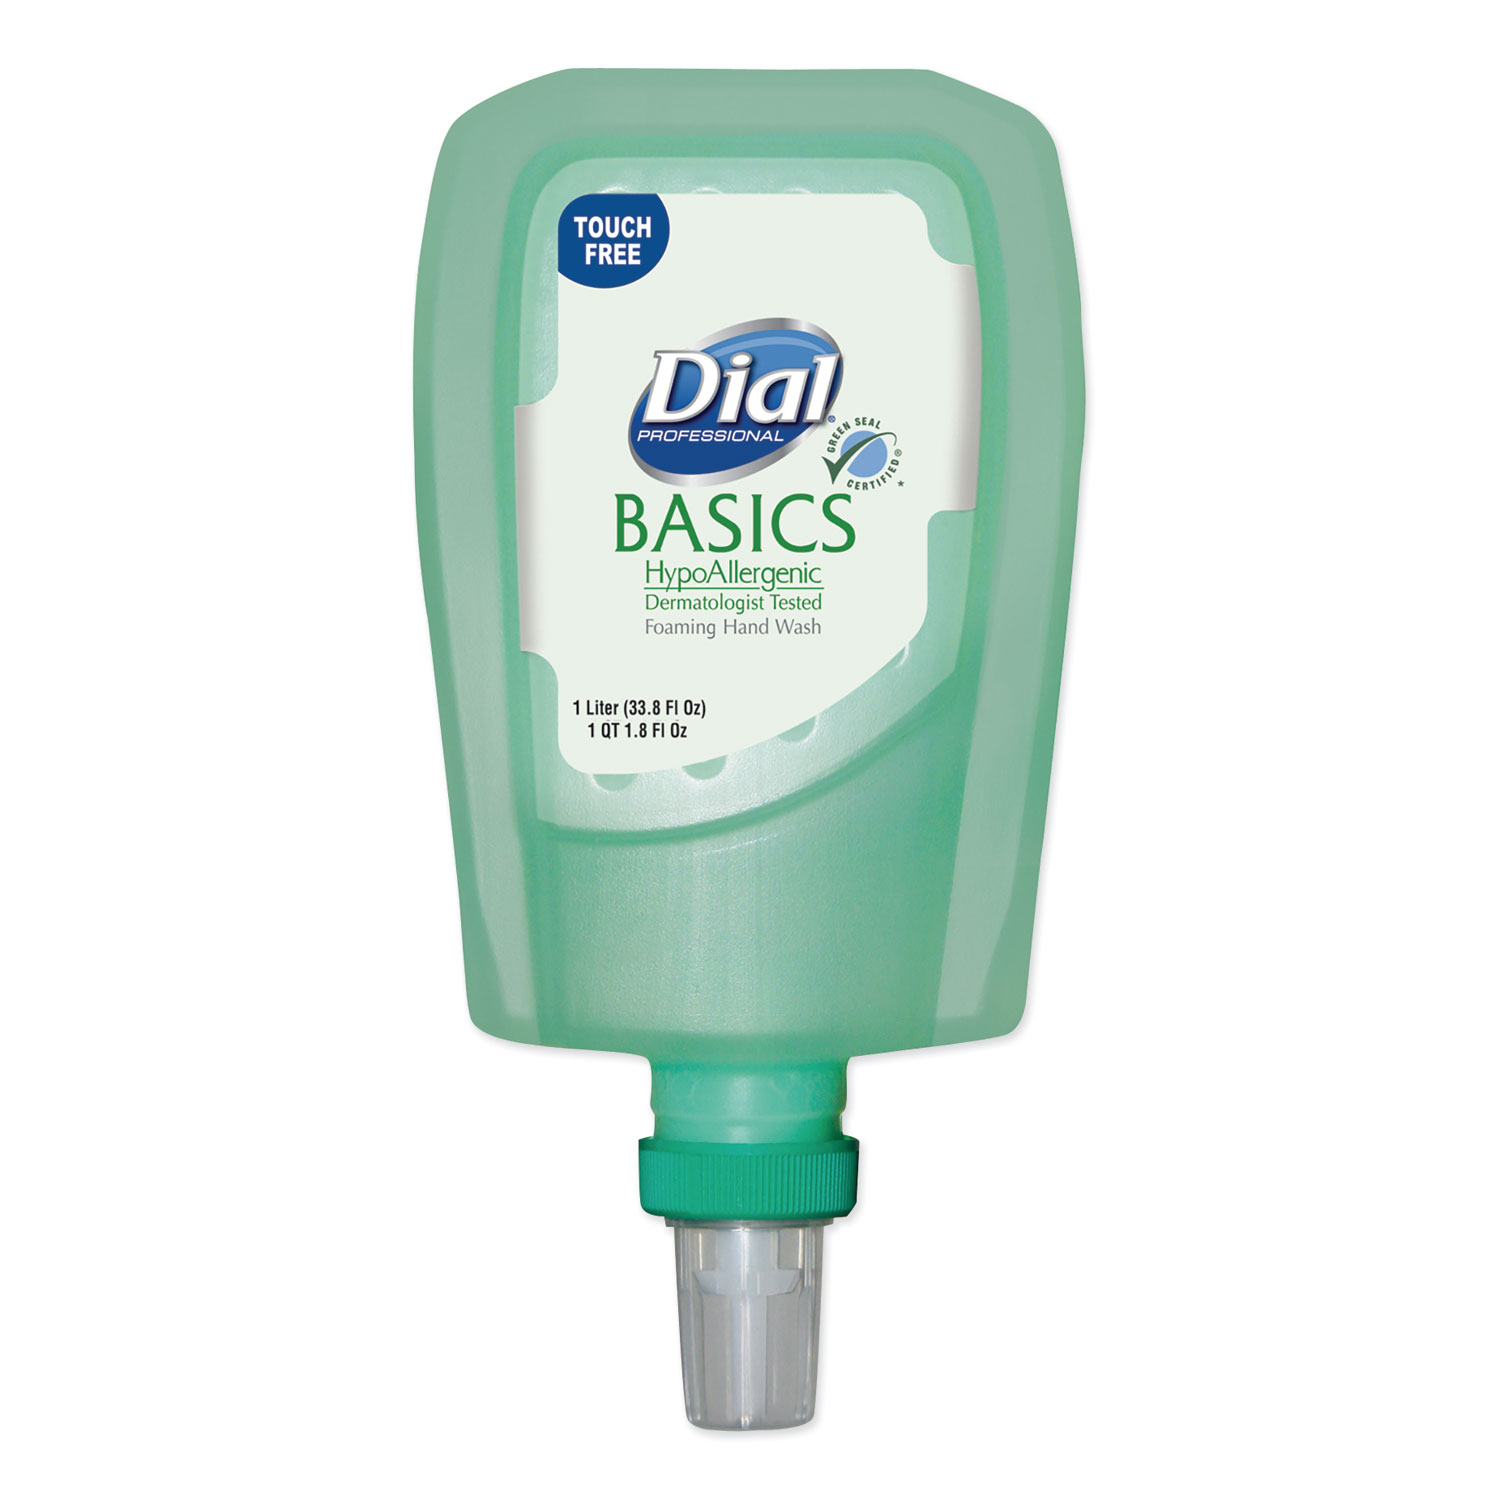  Dial 16722 FIT Basics Hypoallergenic Foaming Hand Wash Universal Touch Free Refill, Honeysuckle, 1 L Refill, 3/Carton (DIA16722) 